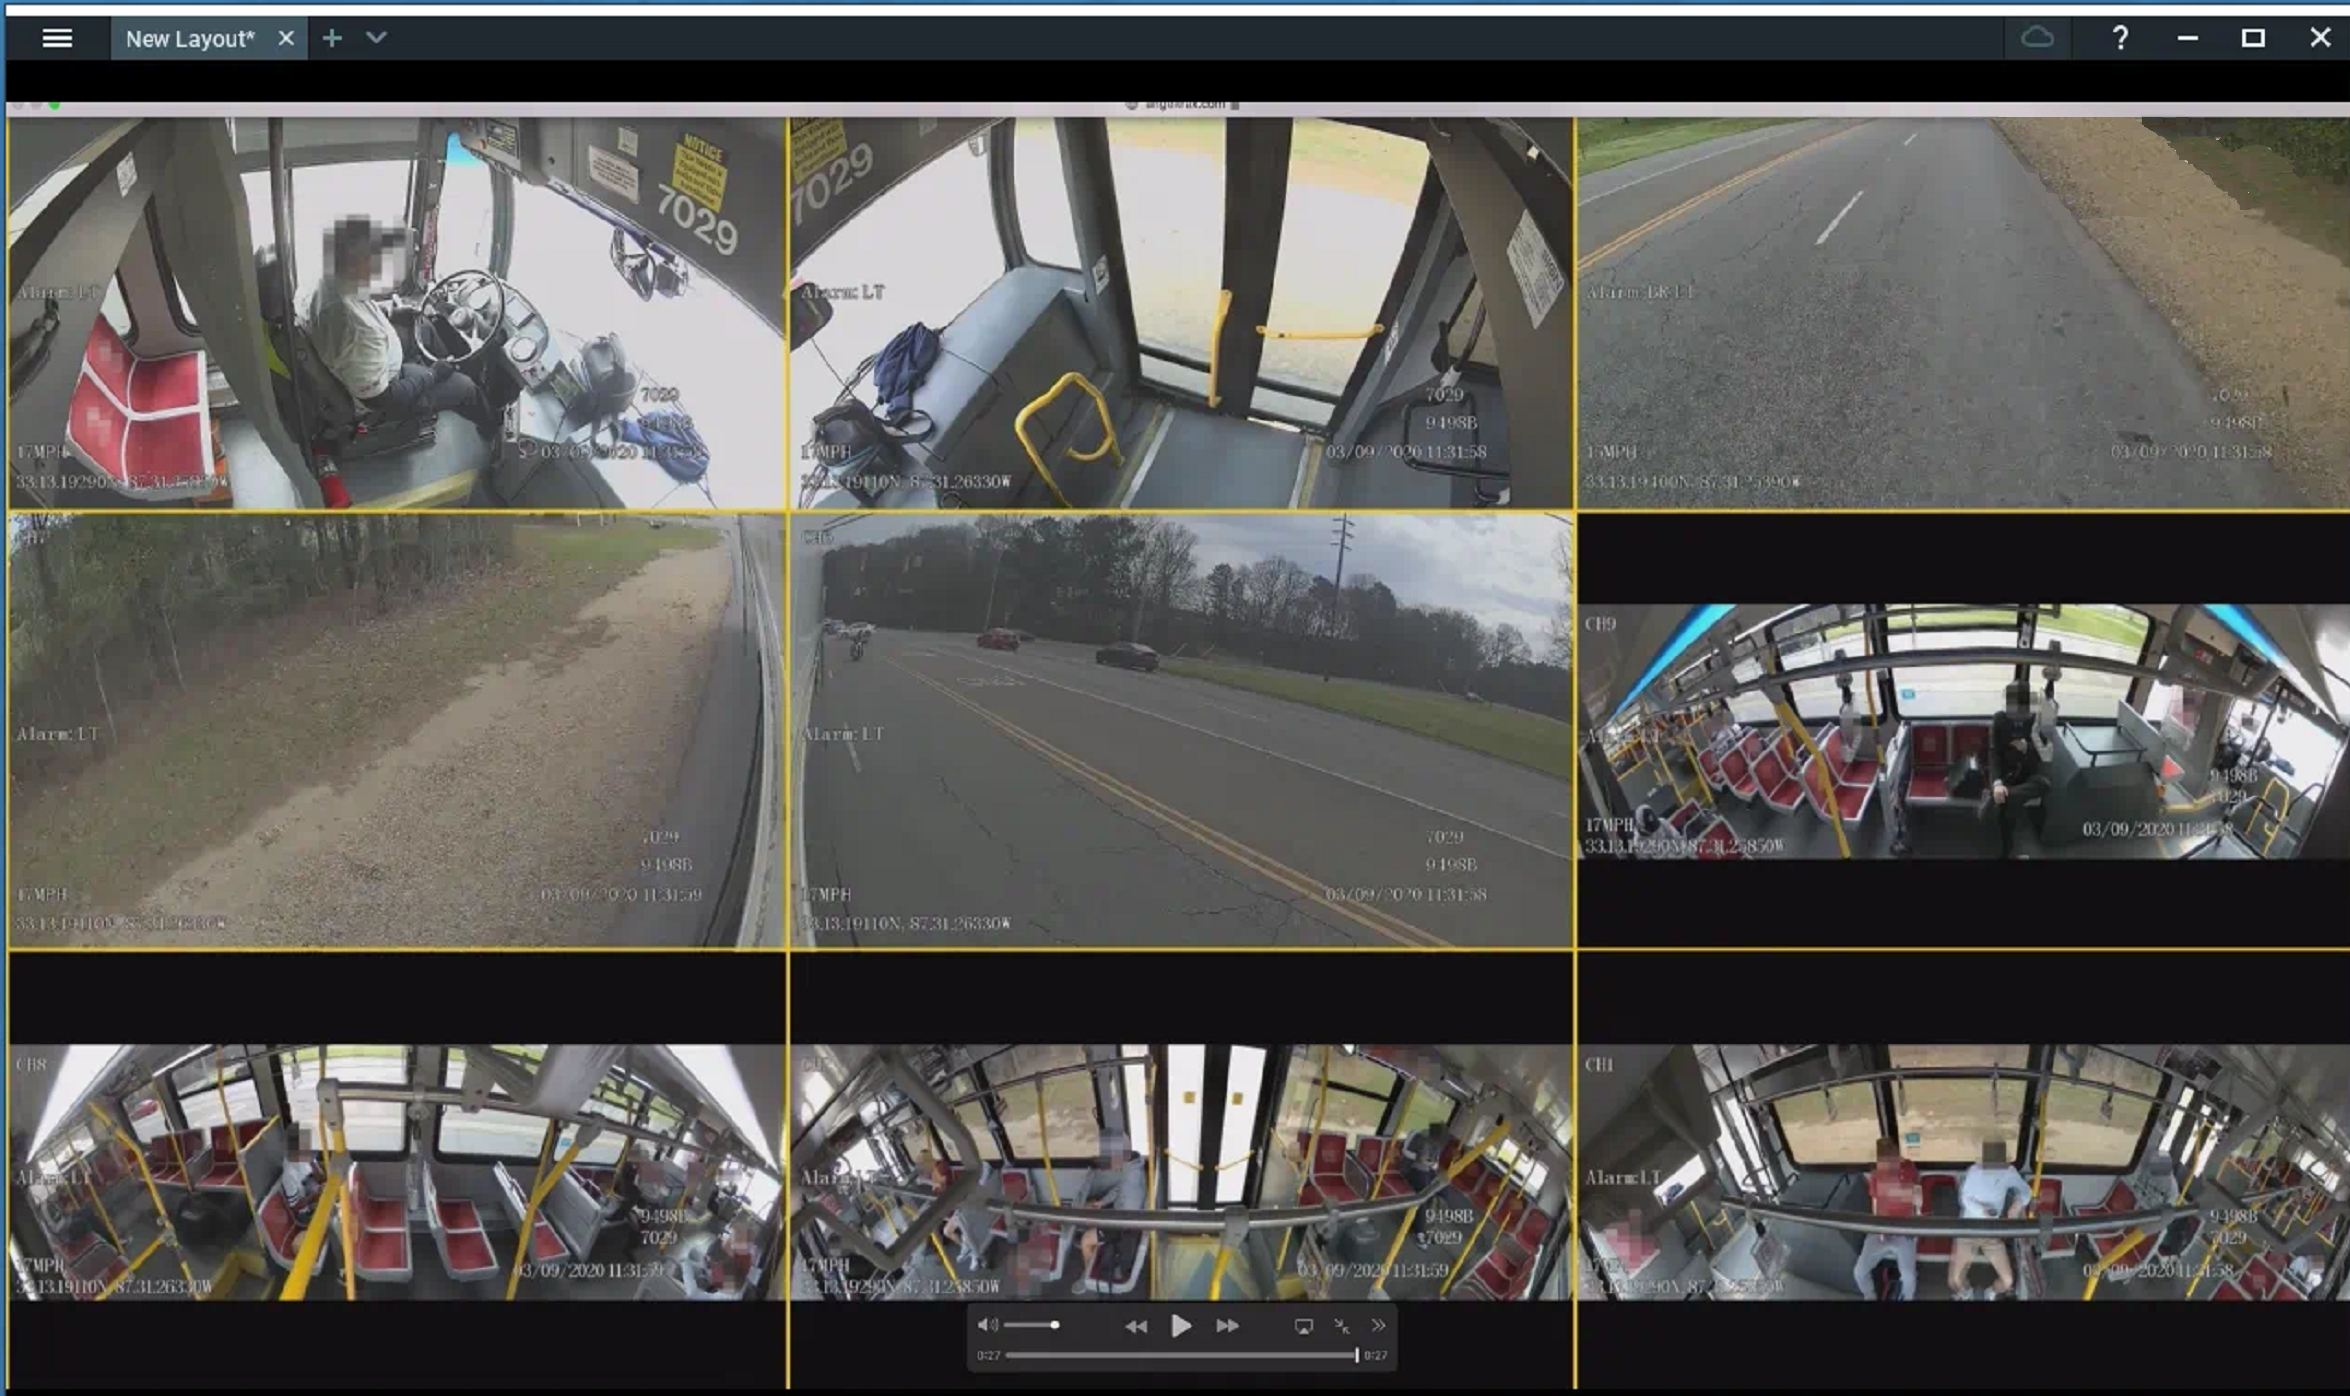 This image provides a screen capture of the live feed view from bus cameras.